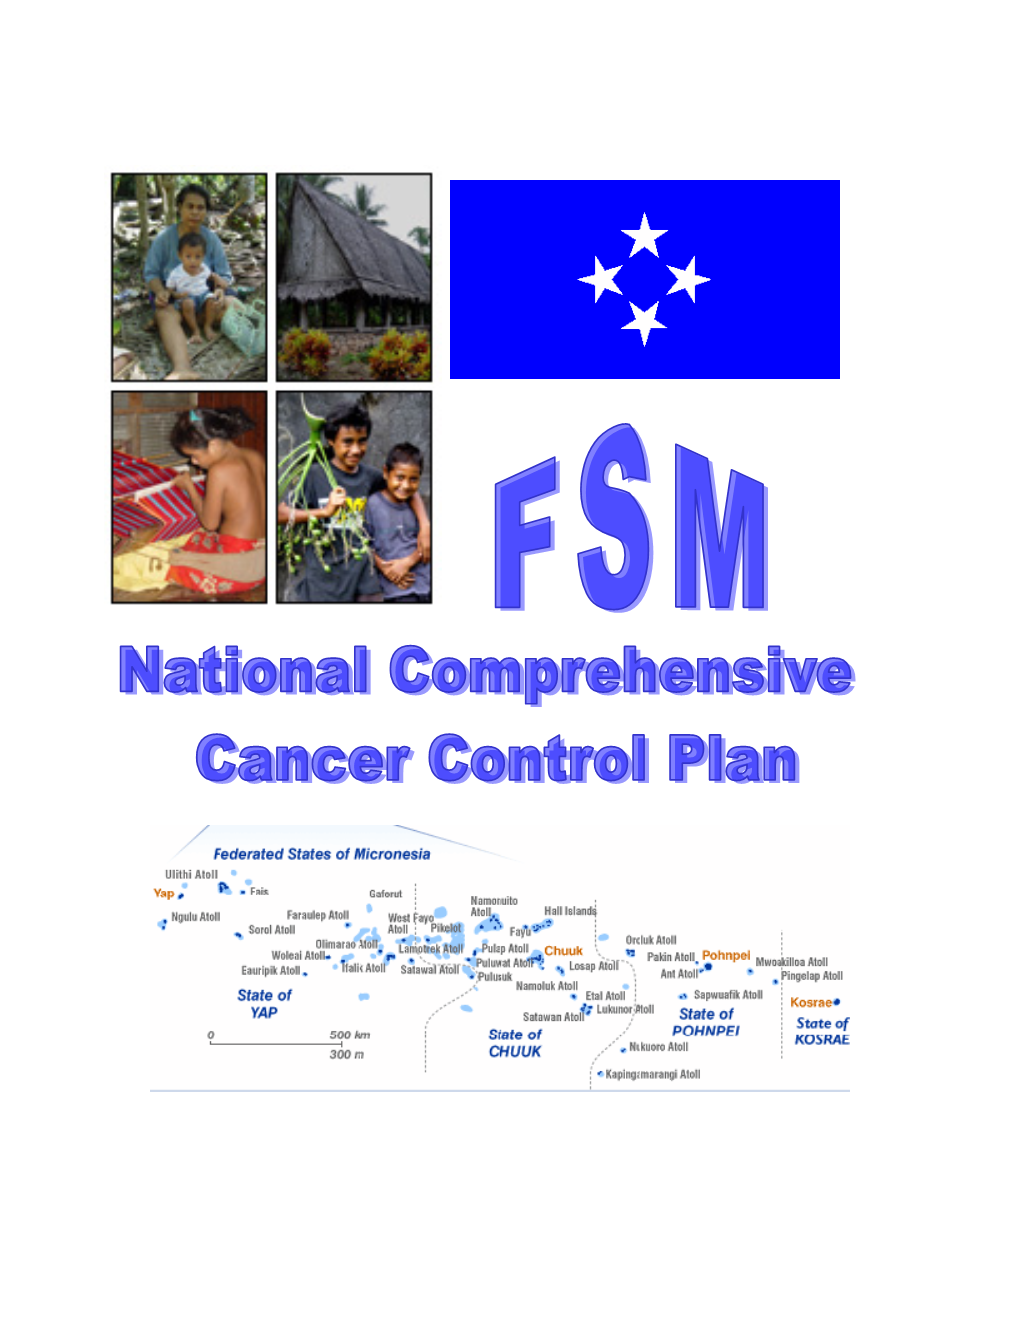 Federated States of Micronesia National Comprehensive Cancer Control Plan, 2007-2012